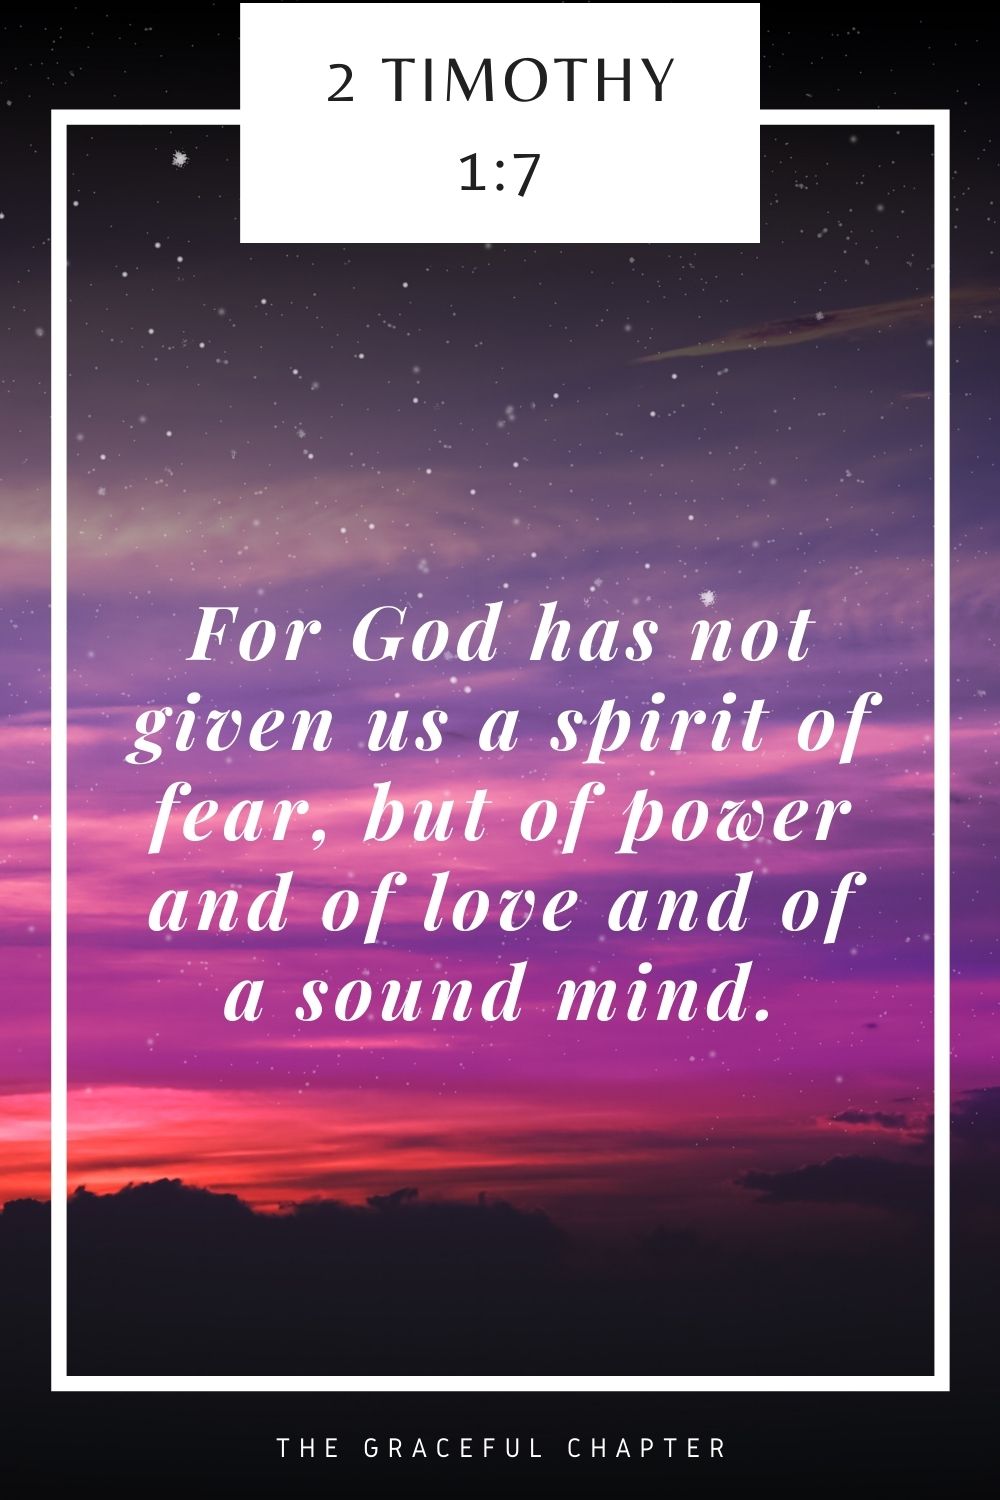 For God has not given us a spirit of fear, but of power and of love and of a sound mind. 2 Timothy 1:7